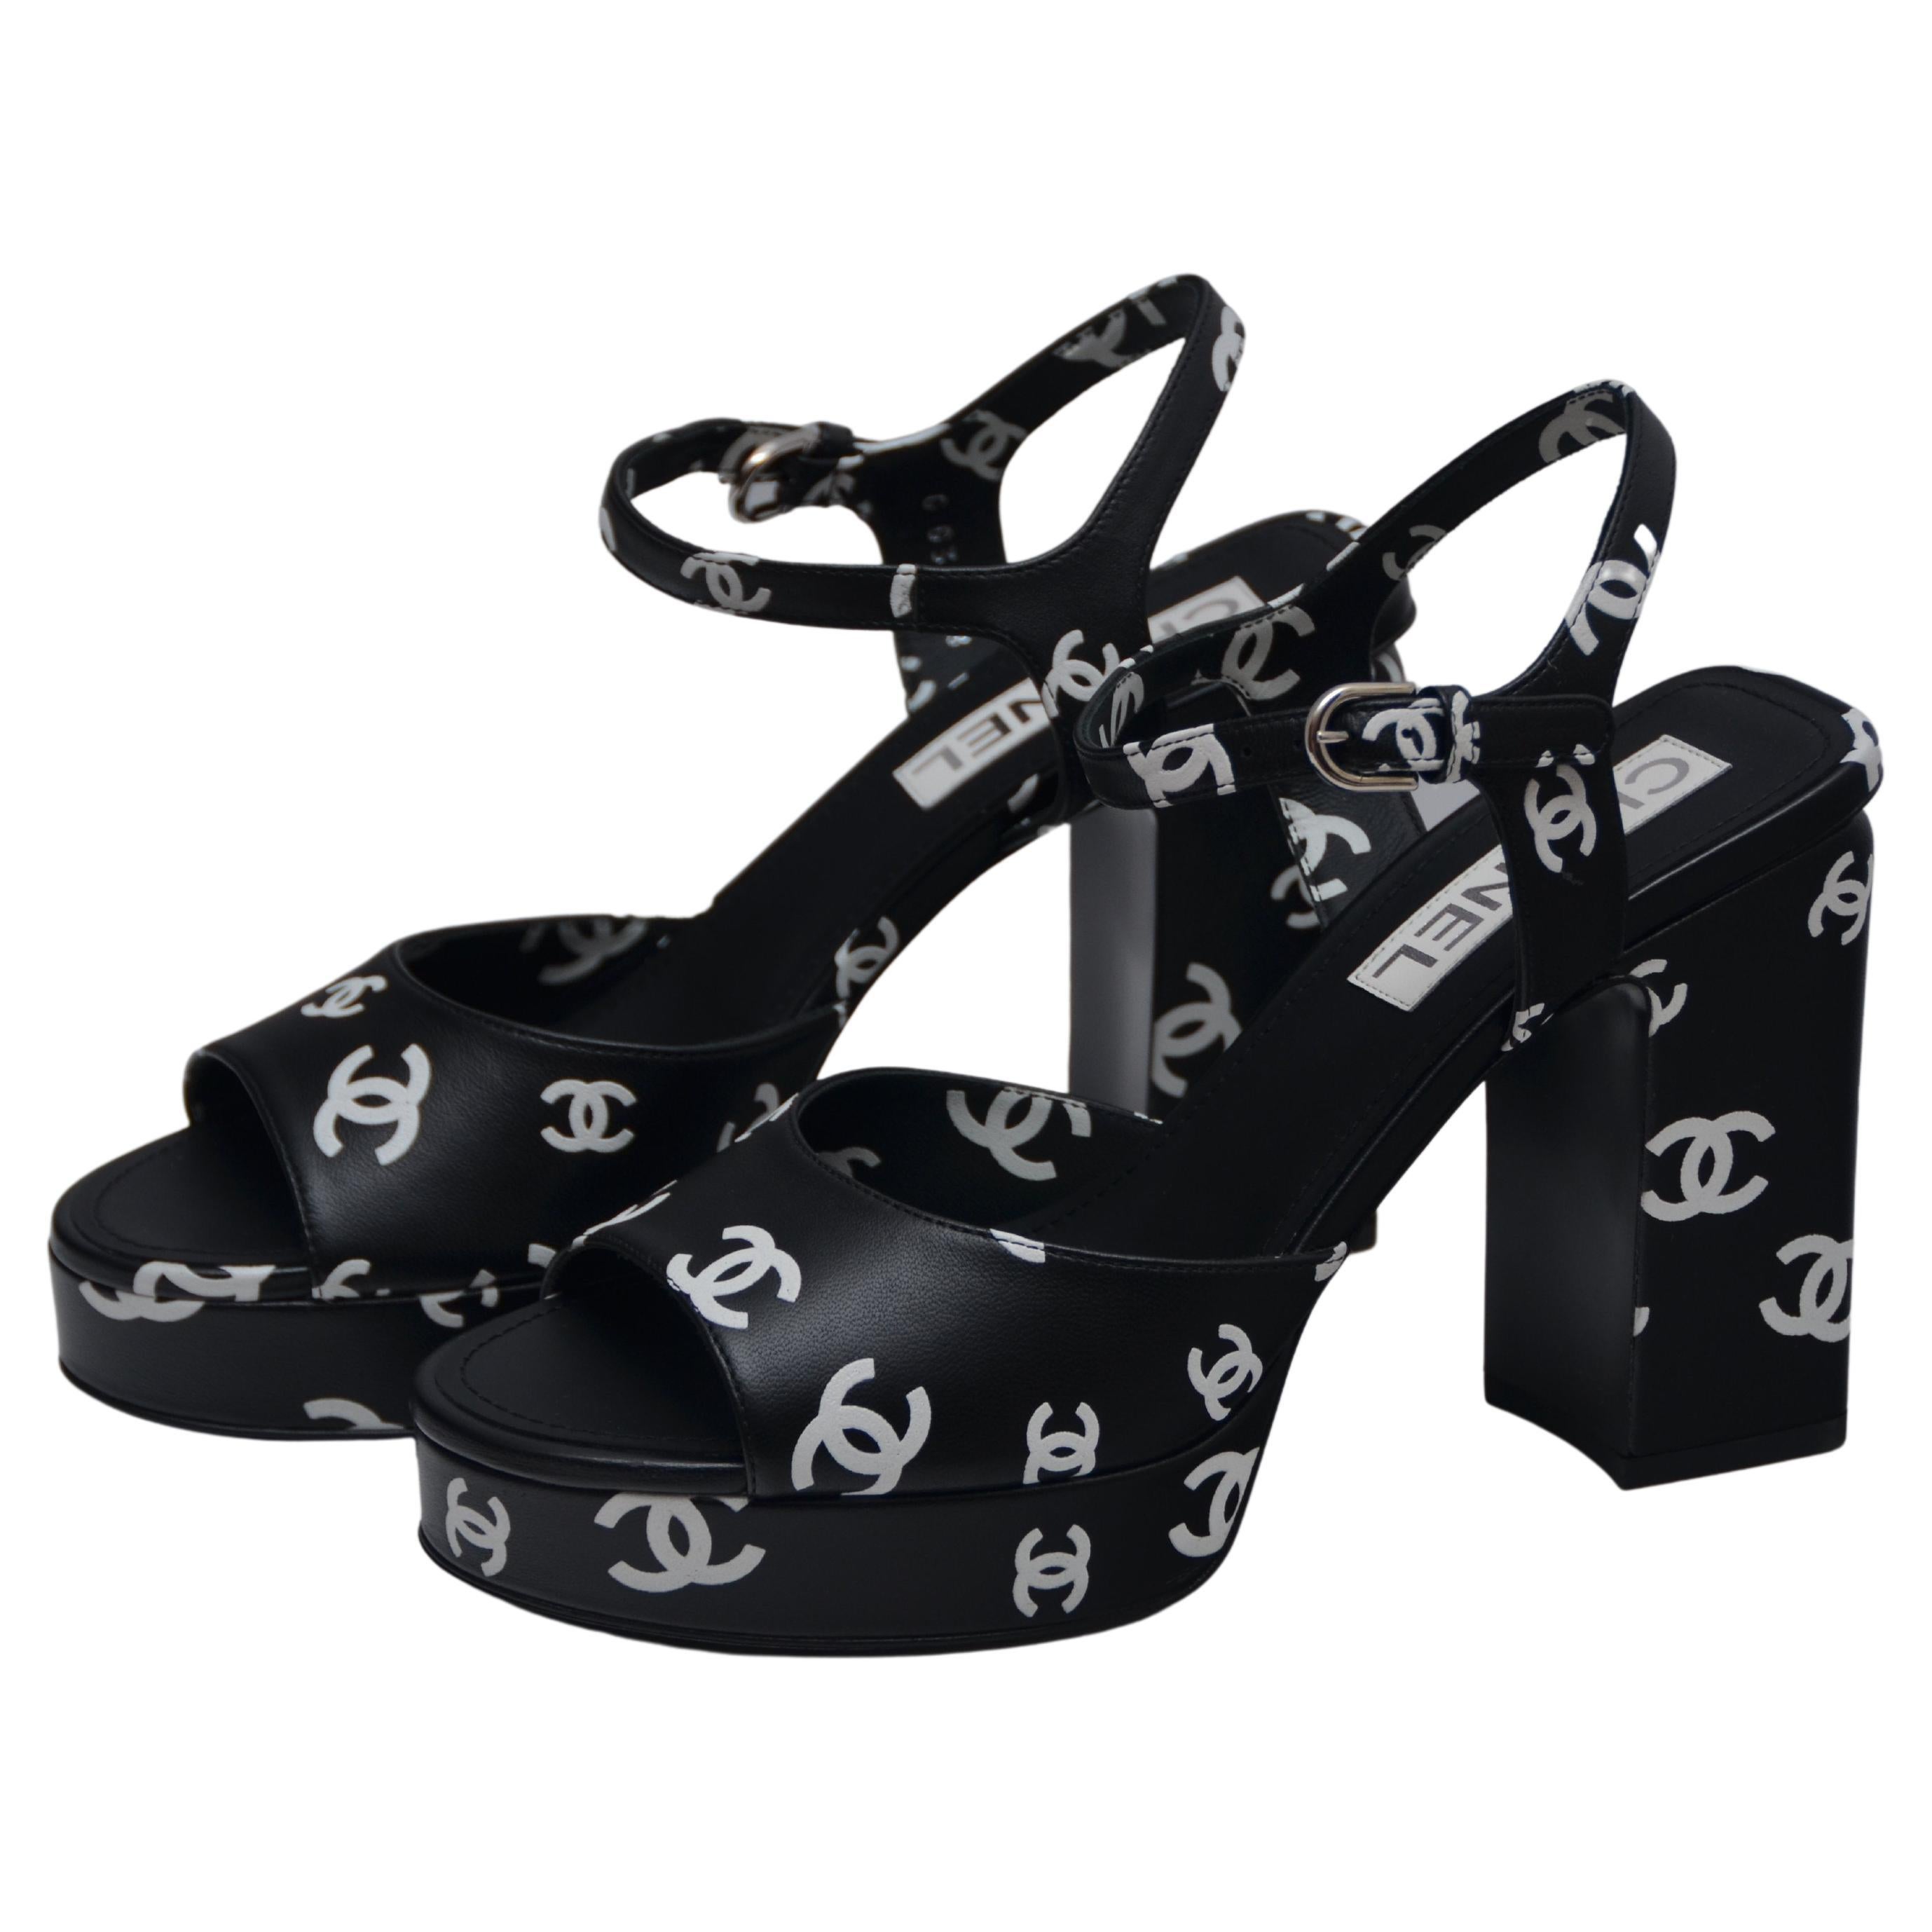 Chanel Shoes Size 40 - 59 For Sale on 1stDibs